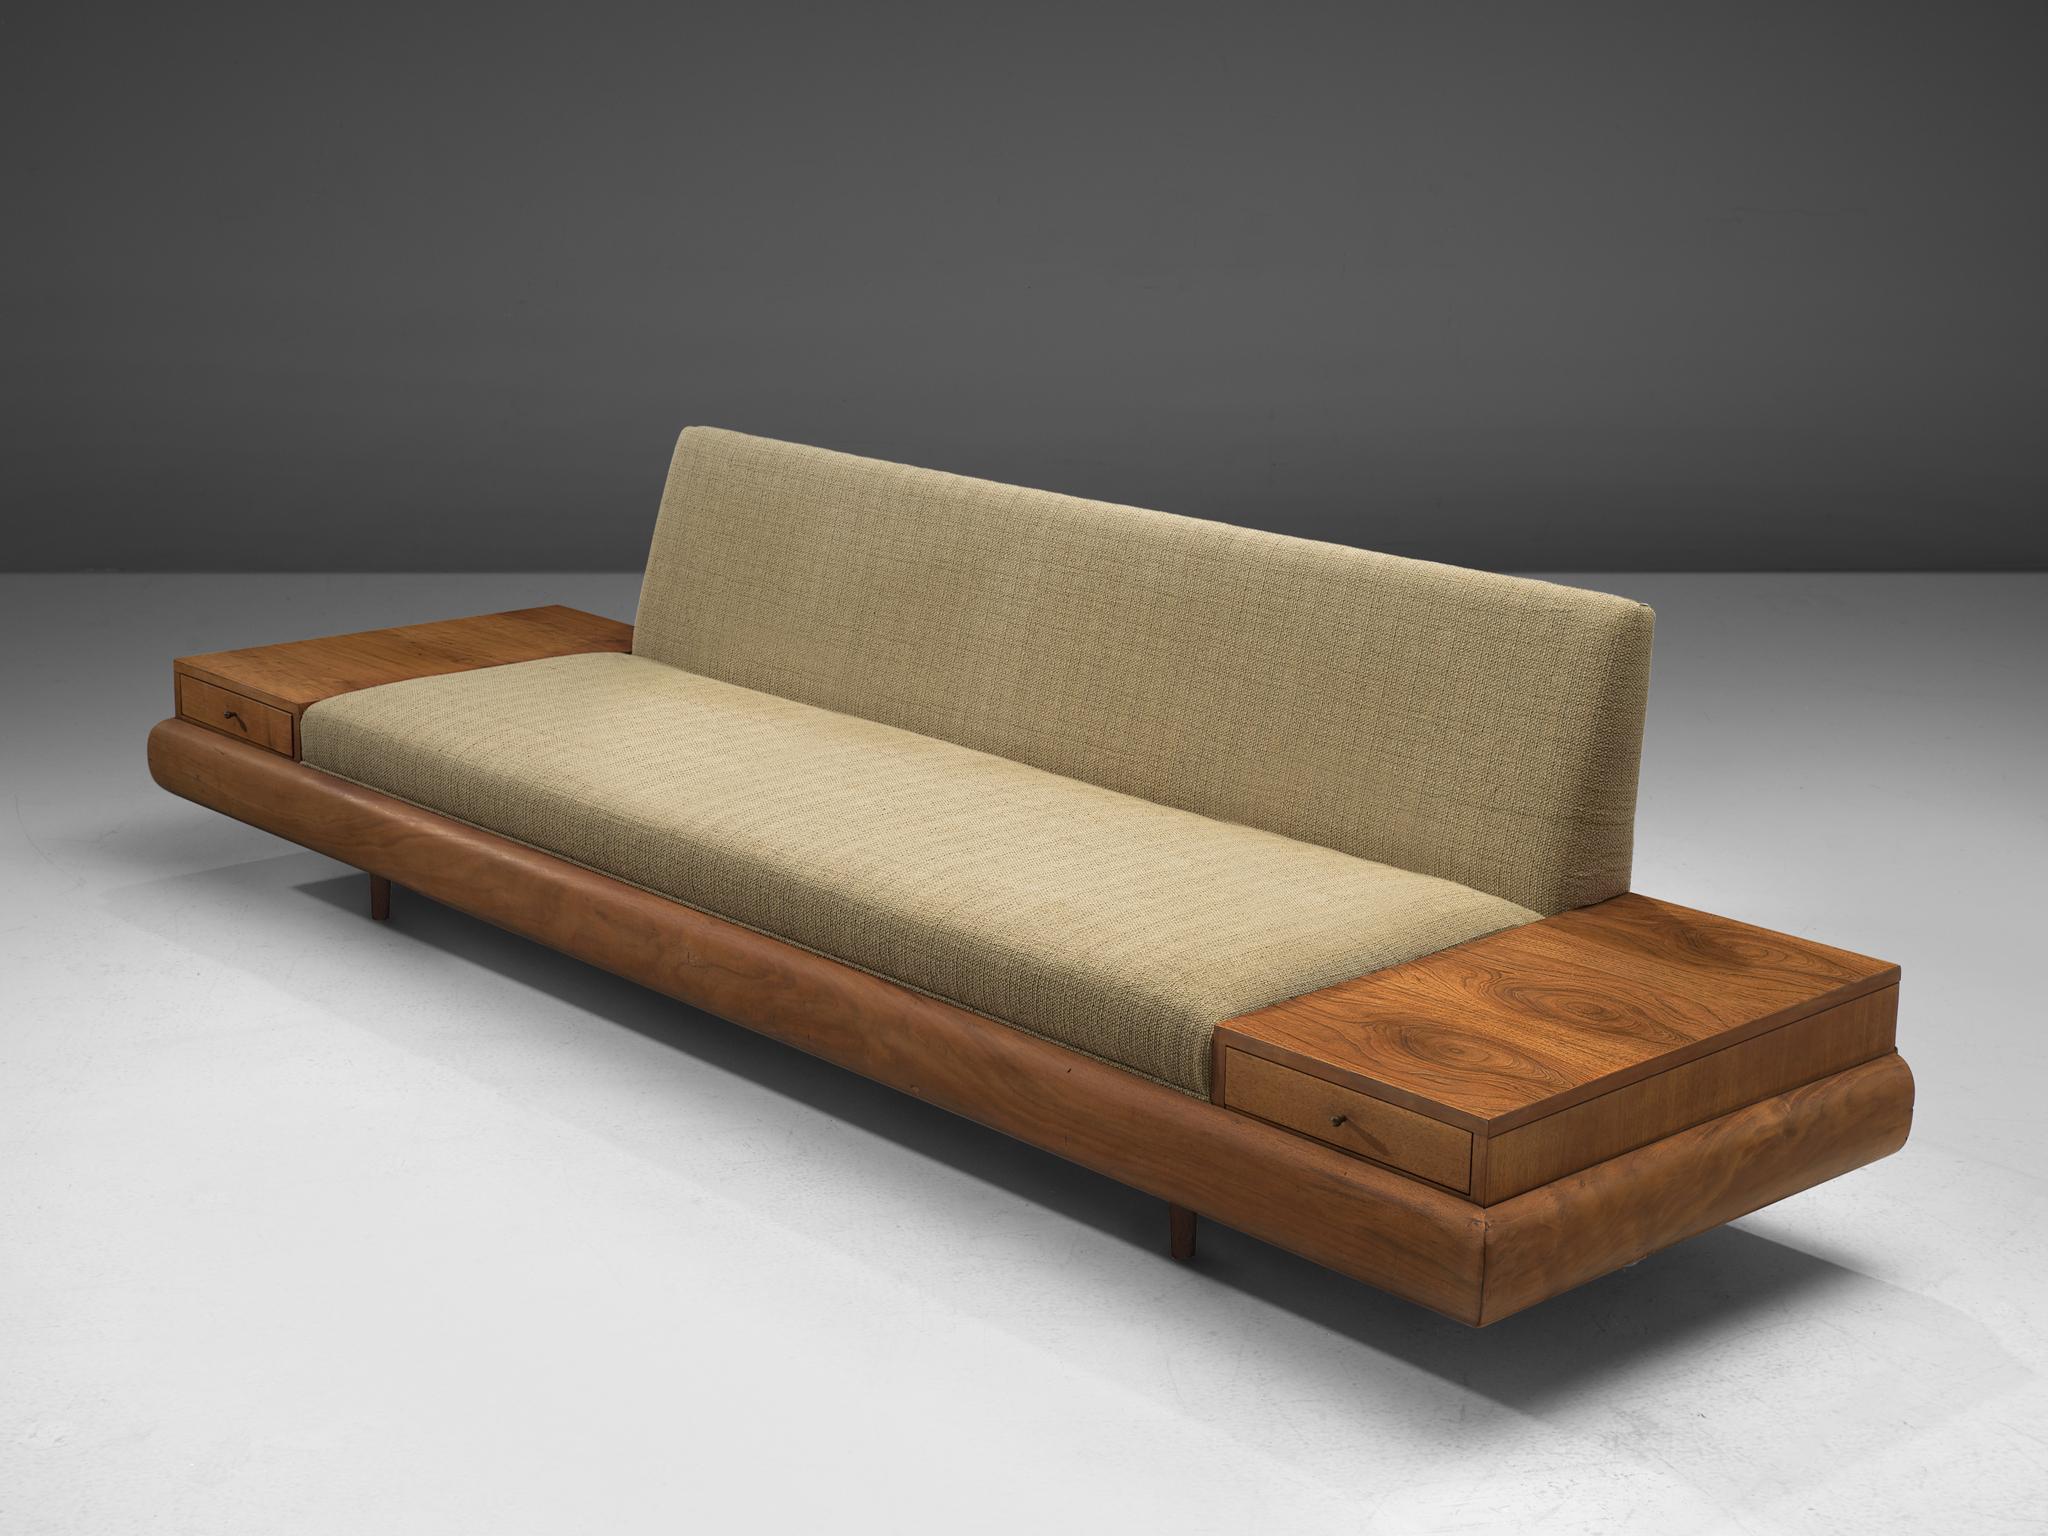 Adrian Pearsall, 'Platform' sofa, in soft green fabric and walnut, United States, 1960s

This Classic, soft shaped sofa has a unique feel and although it is straight and simplistic it also shows soft, delicate lines and shapes. The sofa has a